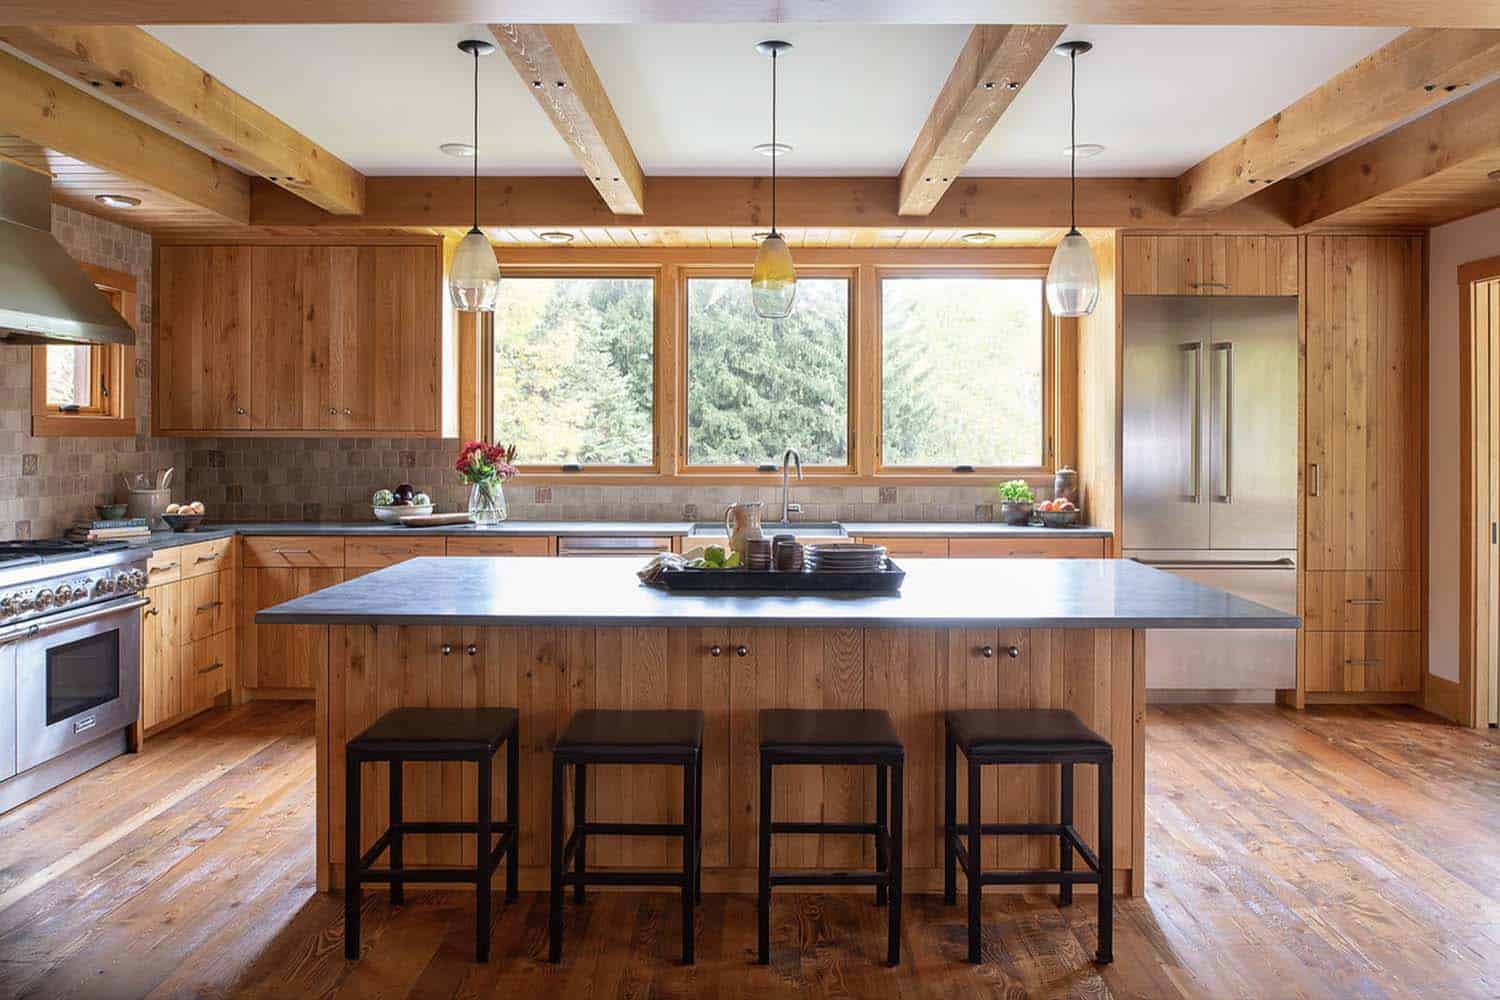 rustic farmhouse style kitchen with wood beams on the ceiling